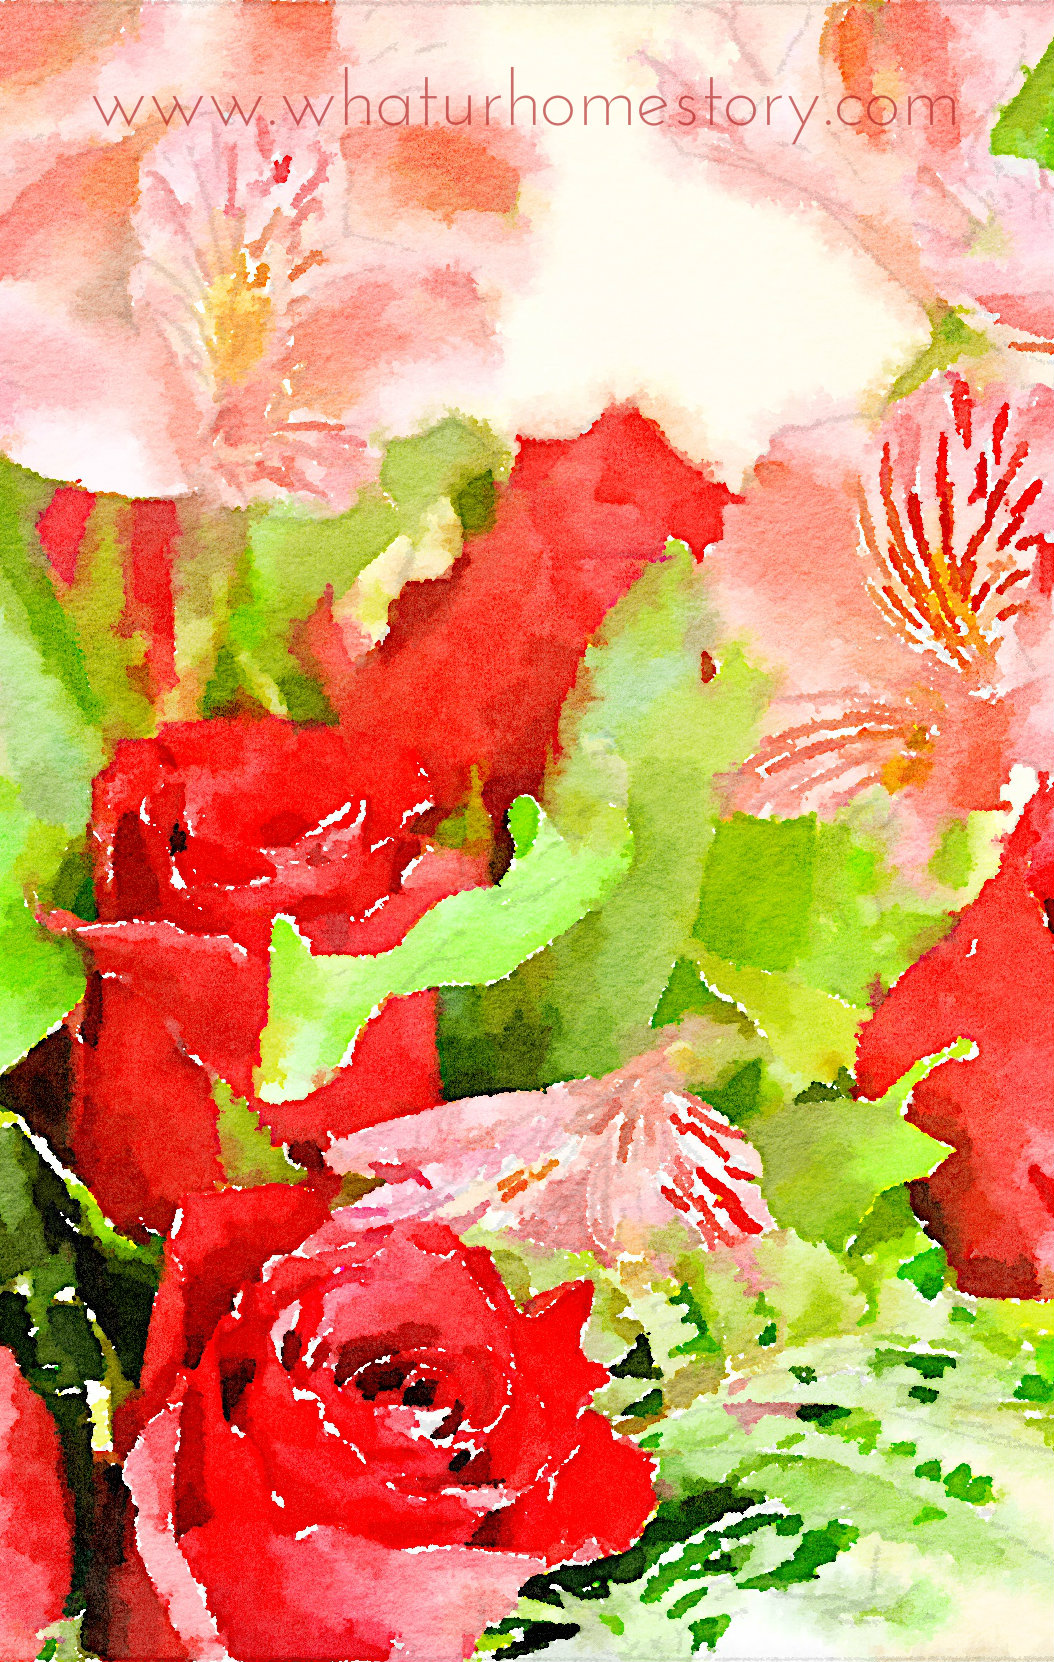 Painted in Waterlogue, Waterlogue app, Turn Any Photo into Watercolor